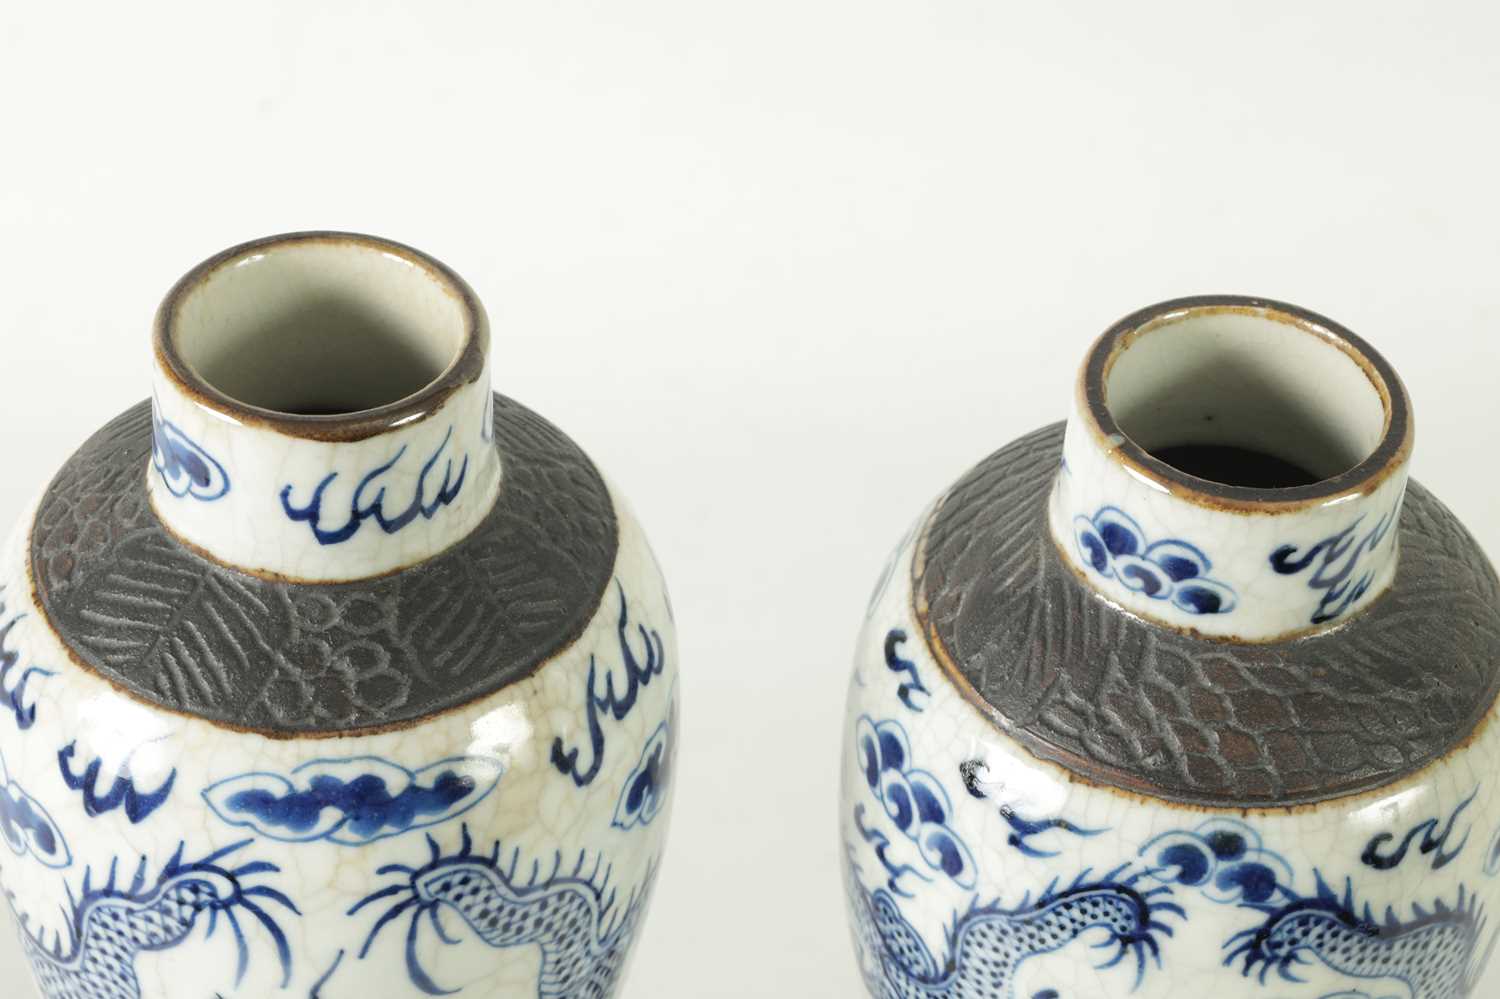 A PAIR OF 19TH CENTURY CHINESE CRACKLE GLAZE LIDDED VASES - Image 9 of 11